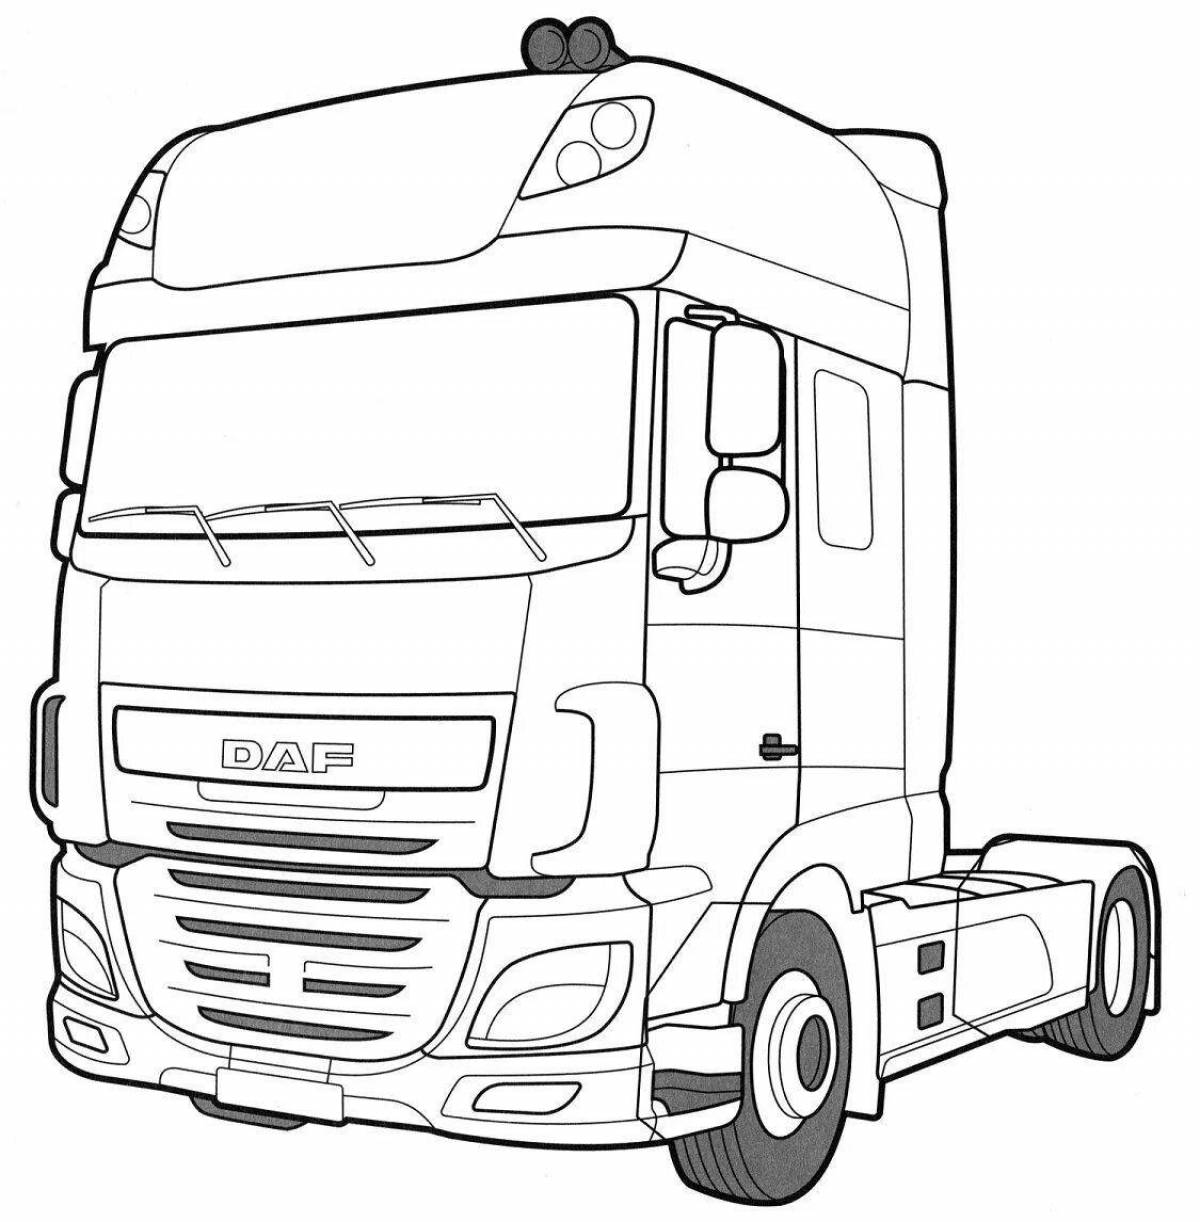 Grand Mercedes truck coloring page